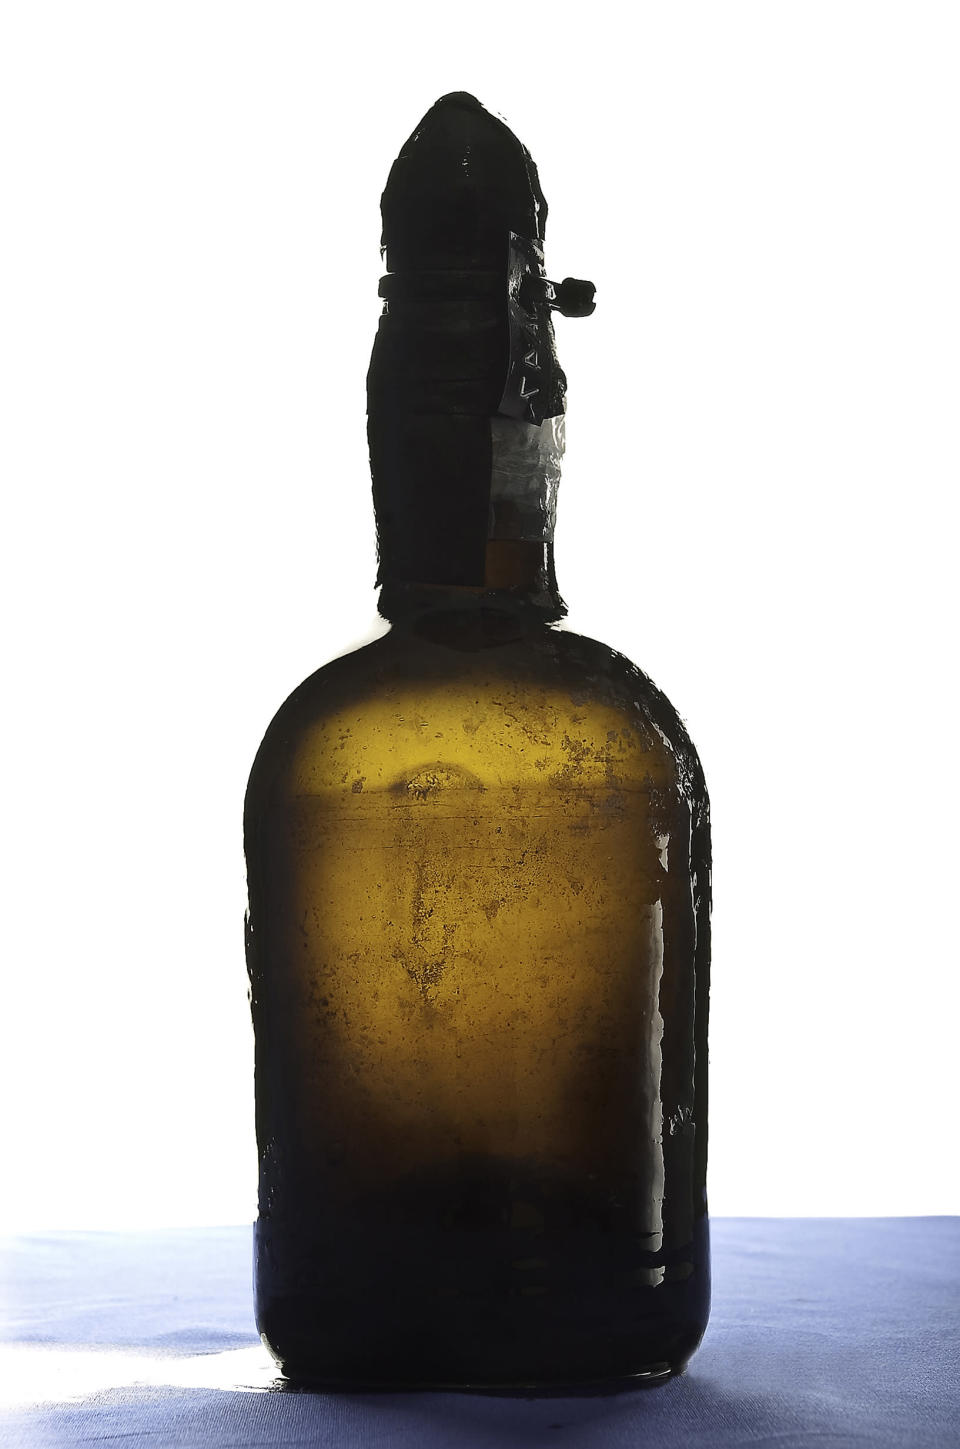 A handout photo received February 8, 2011, shows a bottle of beer that was retrieved from a shipwreck in the Aland archipelago in the summer of 2010, at the Technical Research Centre of Finland (VTT) in Espoo. Divers retrieved more than 160 bottles of champagne and five bottles of beer in July 2010, from the wreck of a ship that likely sank during the first half of 1800s. The beer in question is one of the world's oldest preserved beers. The VTT is to study the contents of the bottle to determine what kind of a recipe was used in the brewing of the beer and what kind of yeast caused the fermentation process. REUTERS/Augusto Mendes/The Government of Aland/Handout